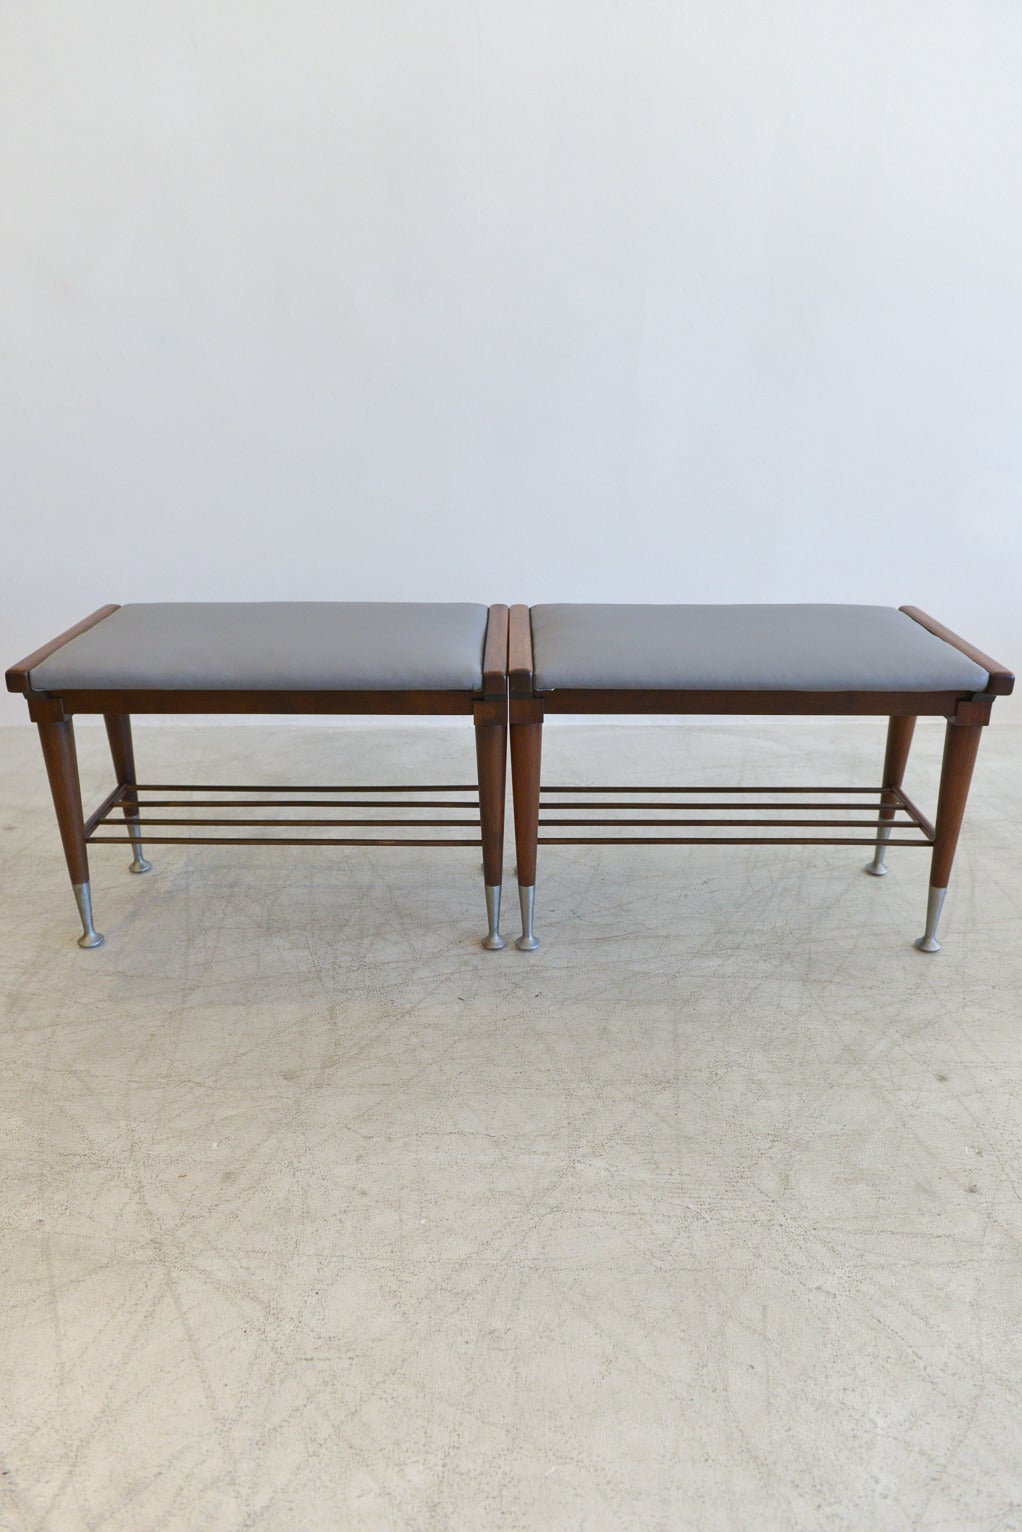 Swedish Important Pair of Edmond Spence Walnut and Leather Benches